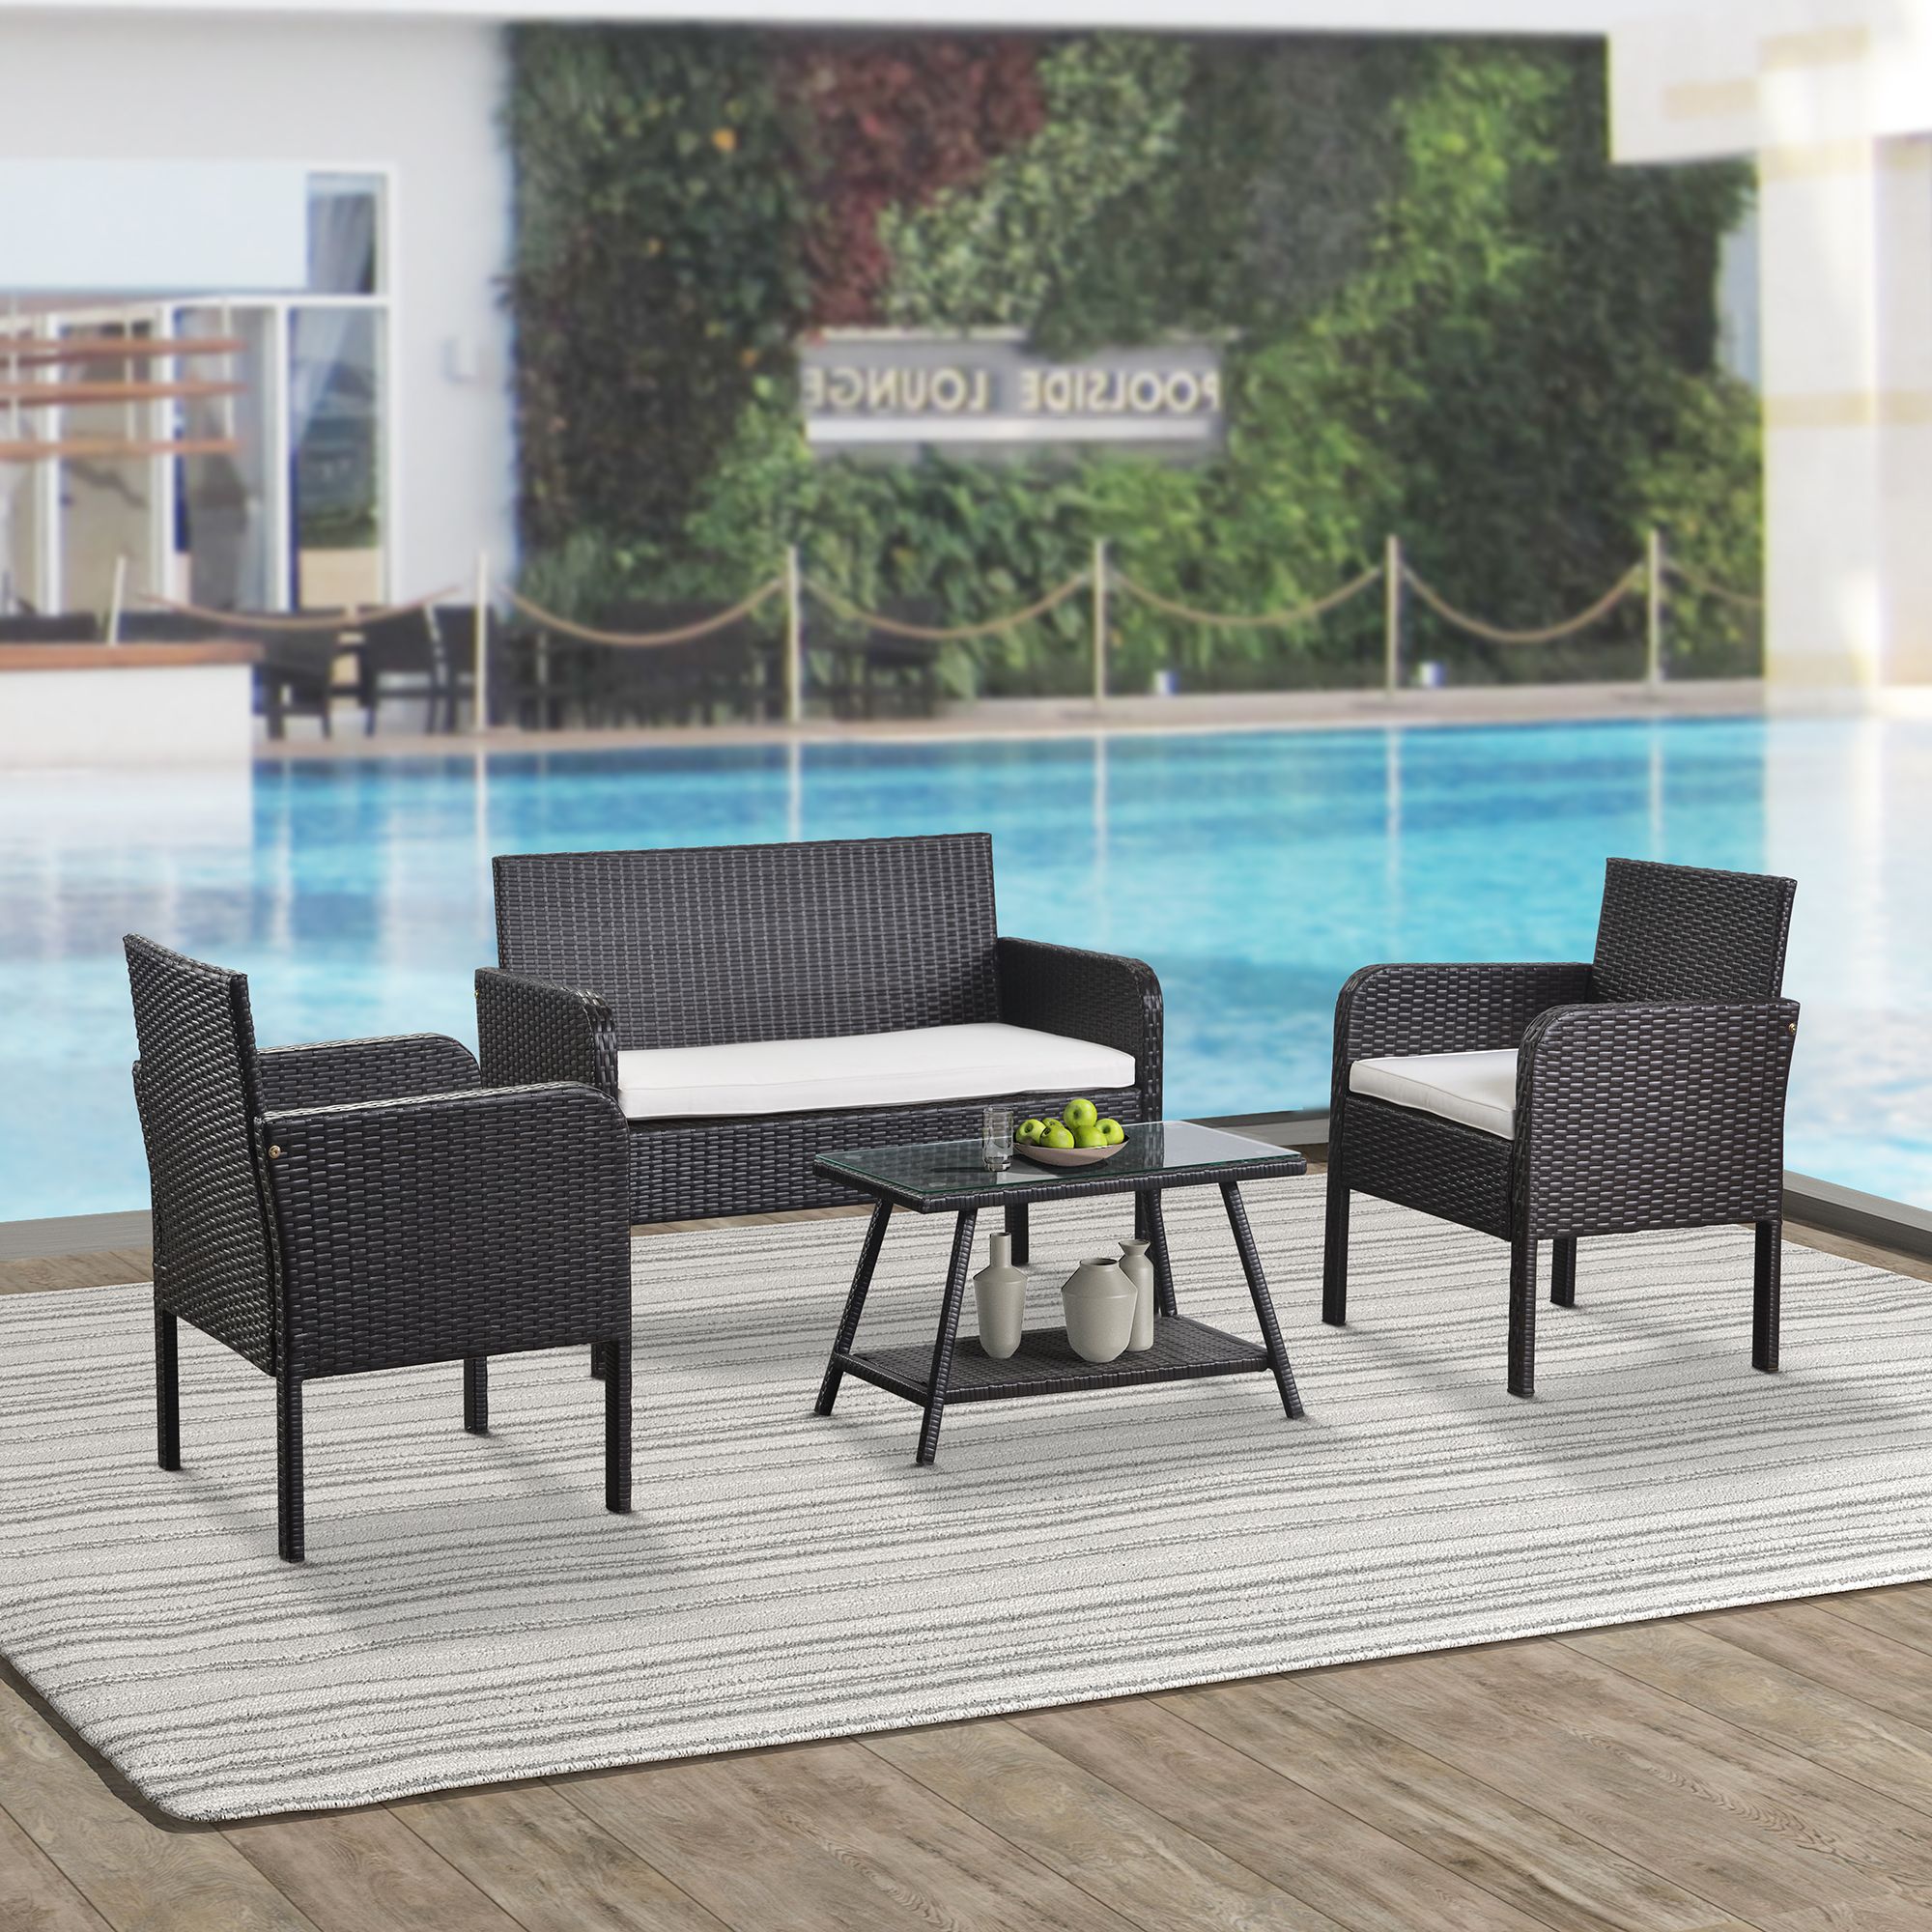 4 Piece Wood Outdoor Bar Sets With Regard To Best And Newest Outdoor Patio Furniture Sets, 4 Piece Brown Wicker Patio Bar Set, 2 Arm (View 1 of 15)